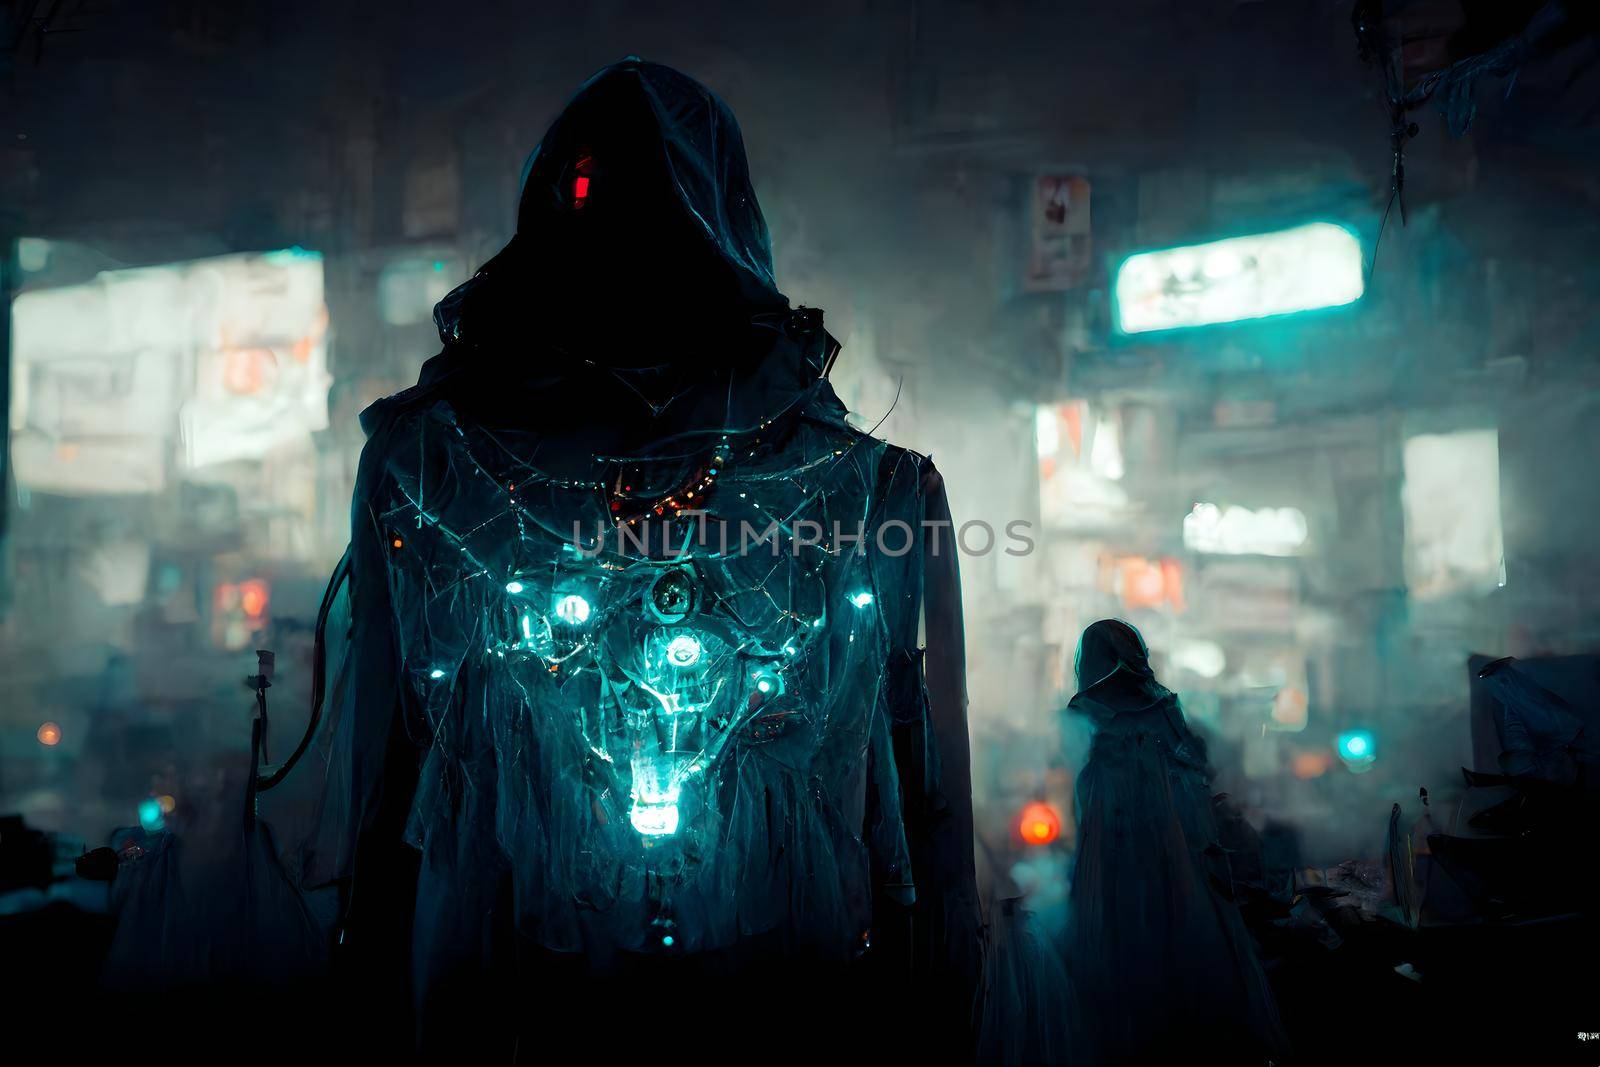 dark cybermage, cyberpunk sorcerer in a cloak with a hood, neural network generated art. Digitally generated image. Not based on any actual scene or pattern.